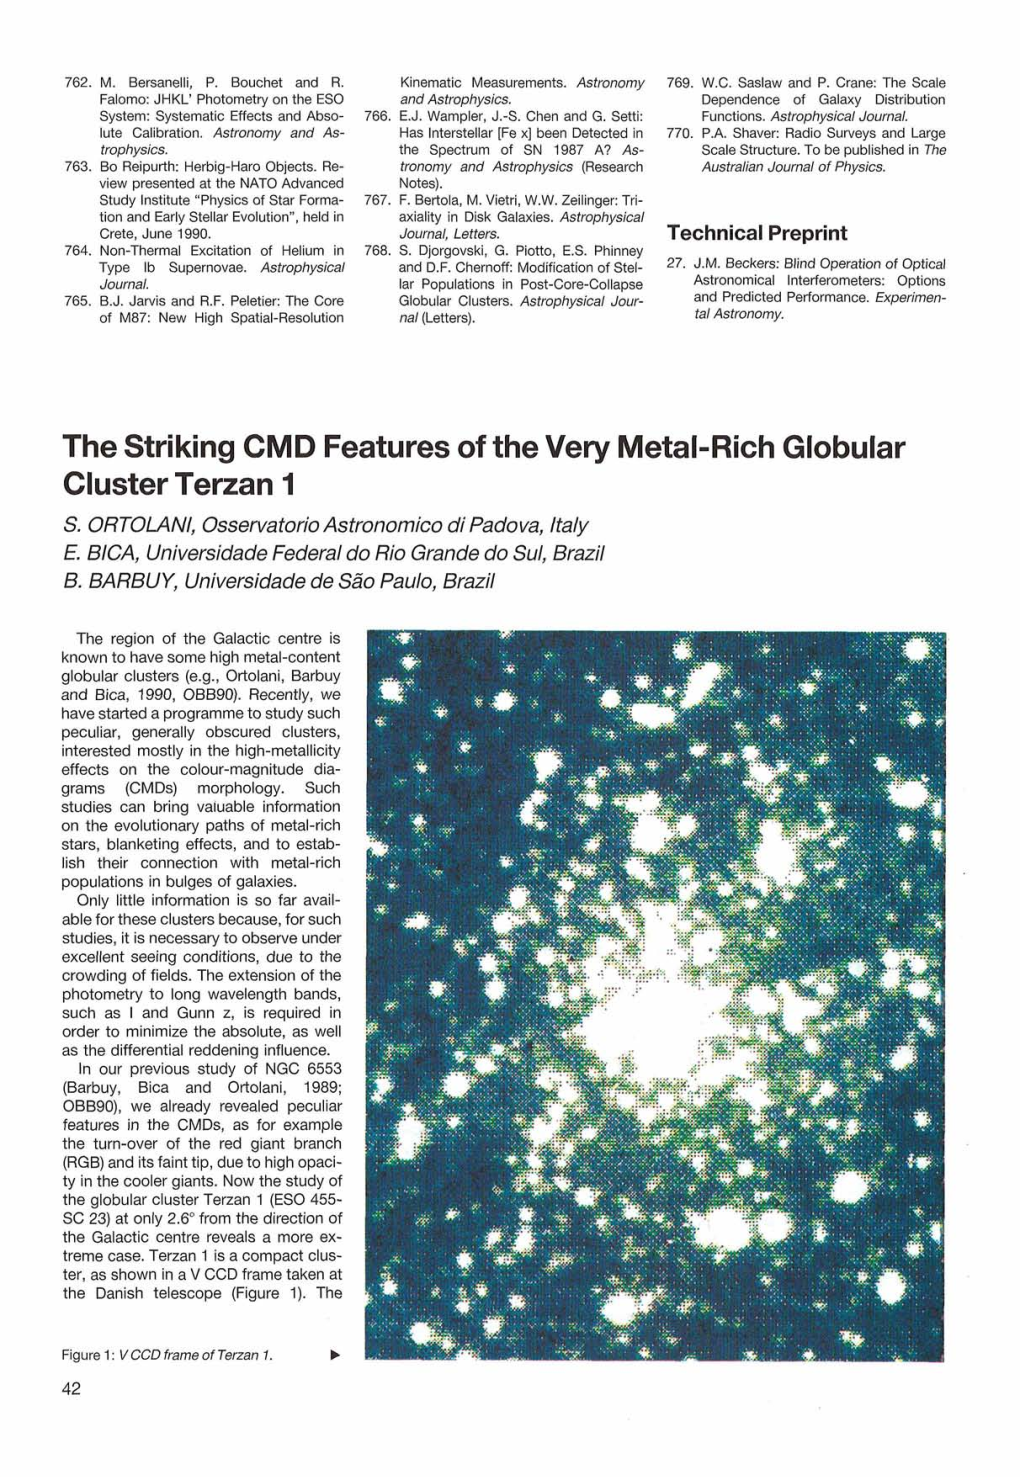 The Striking CMD Features of the Very Metal-Rich Globular Cluster Terzan 1 S